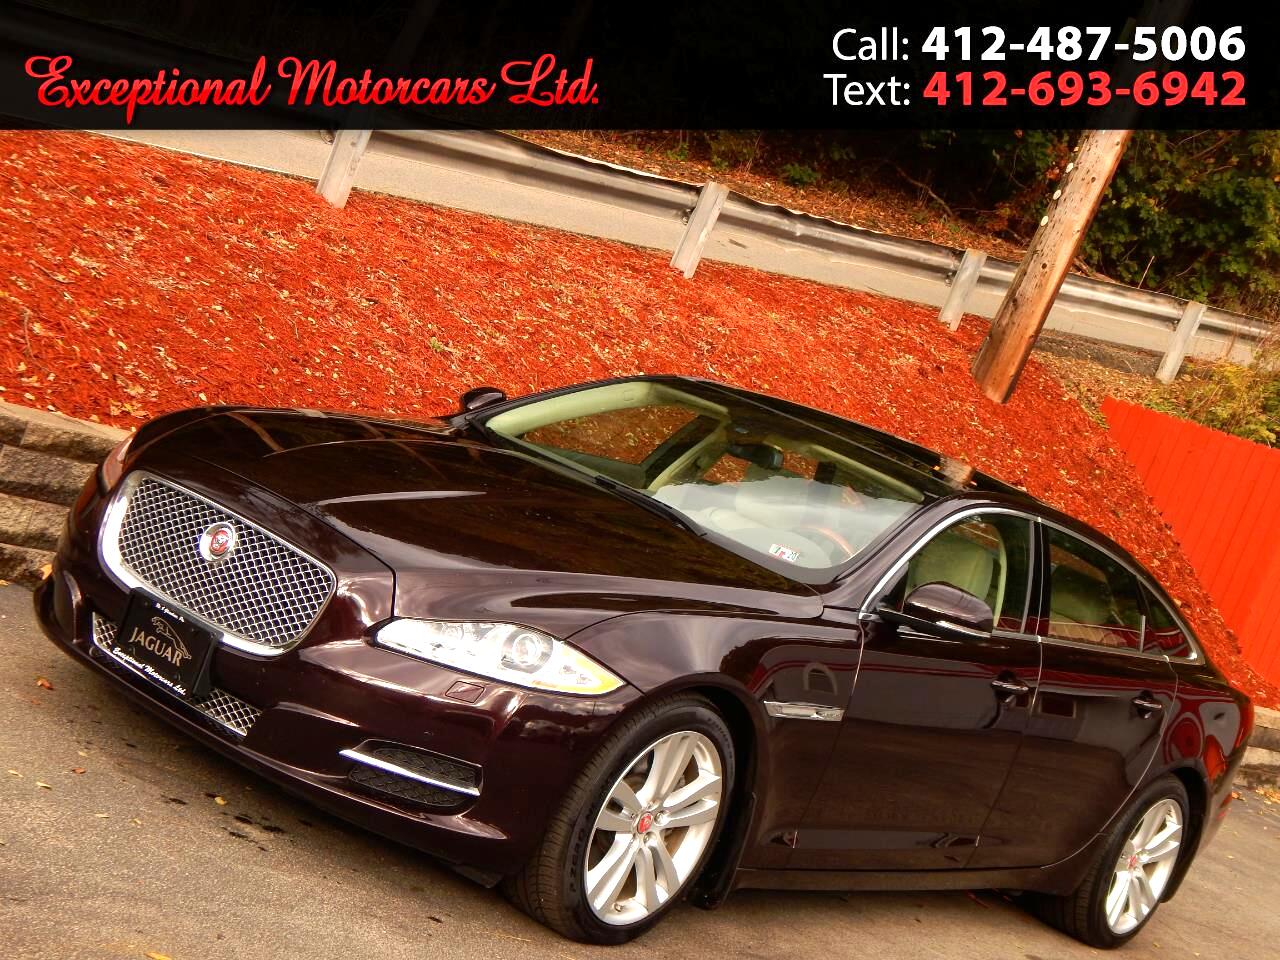 Used 2014 Jaguar XJ 4dr Sdn XJL Portfolio AWD for Sale in Glenshaw PA 15116 Exceptional ...